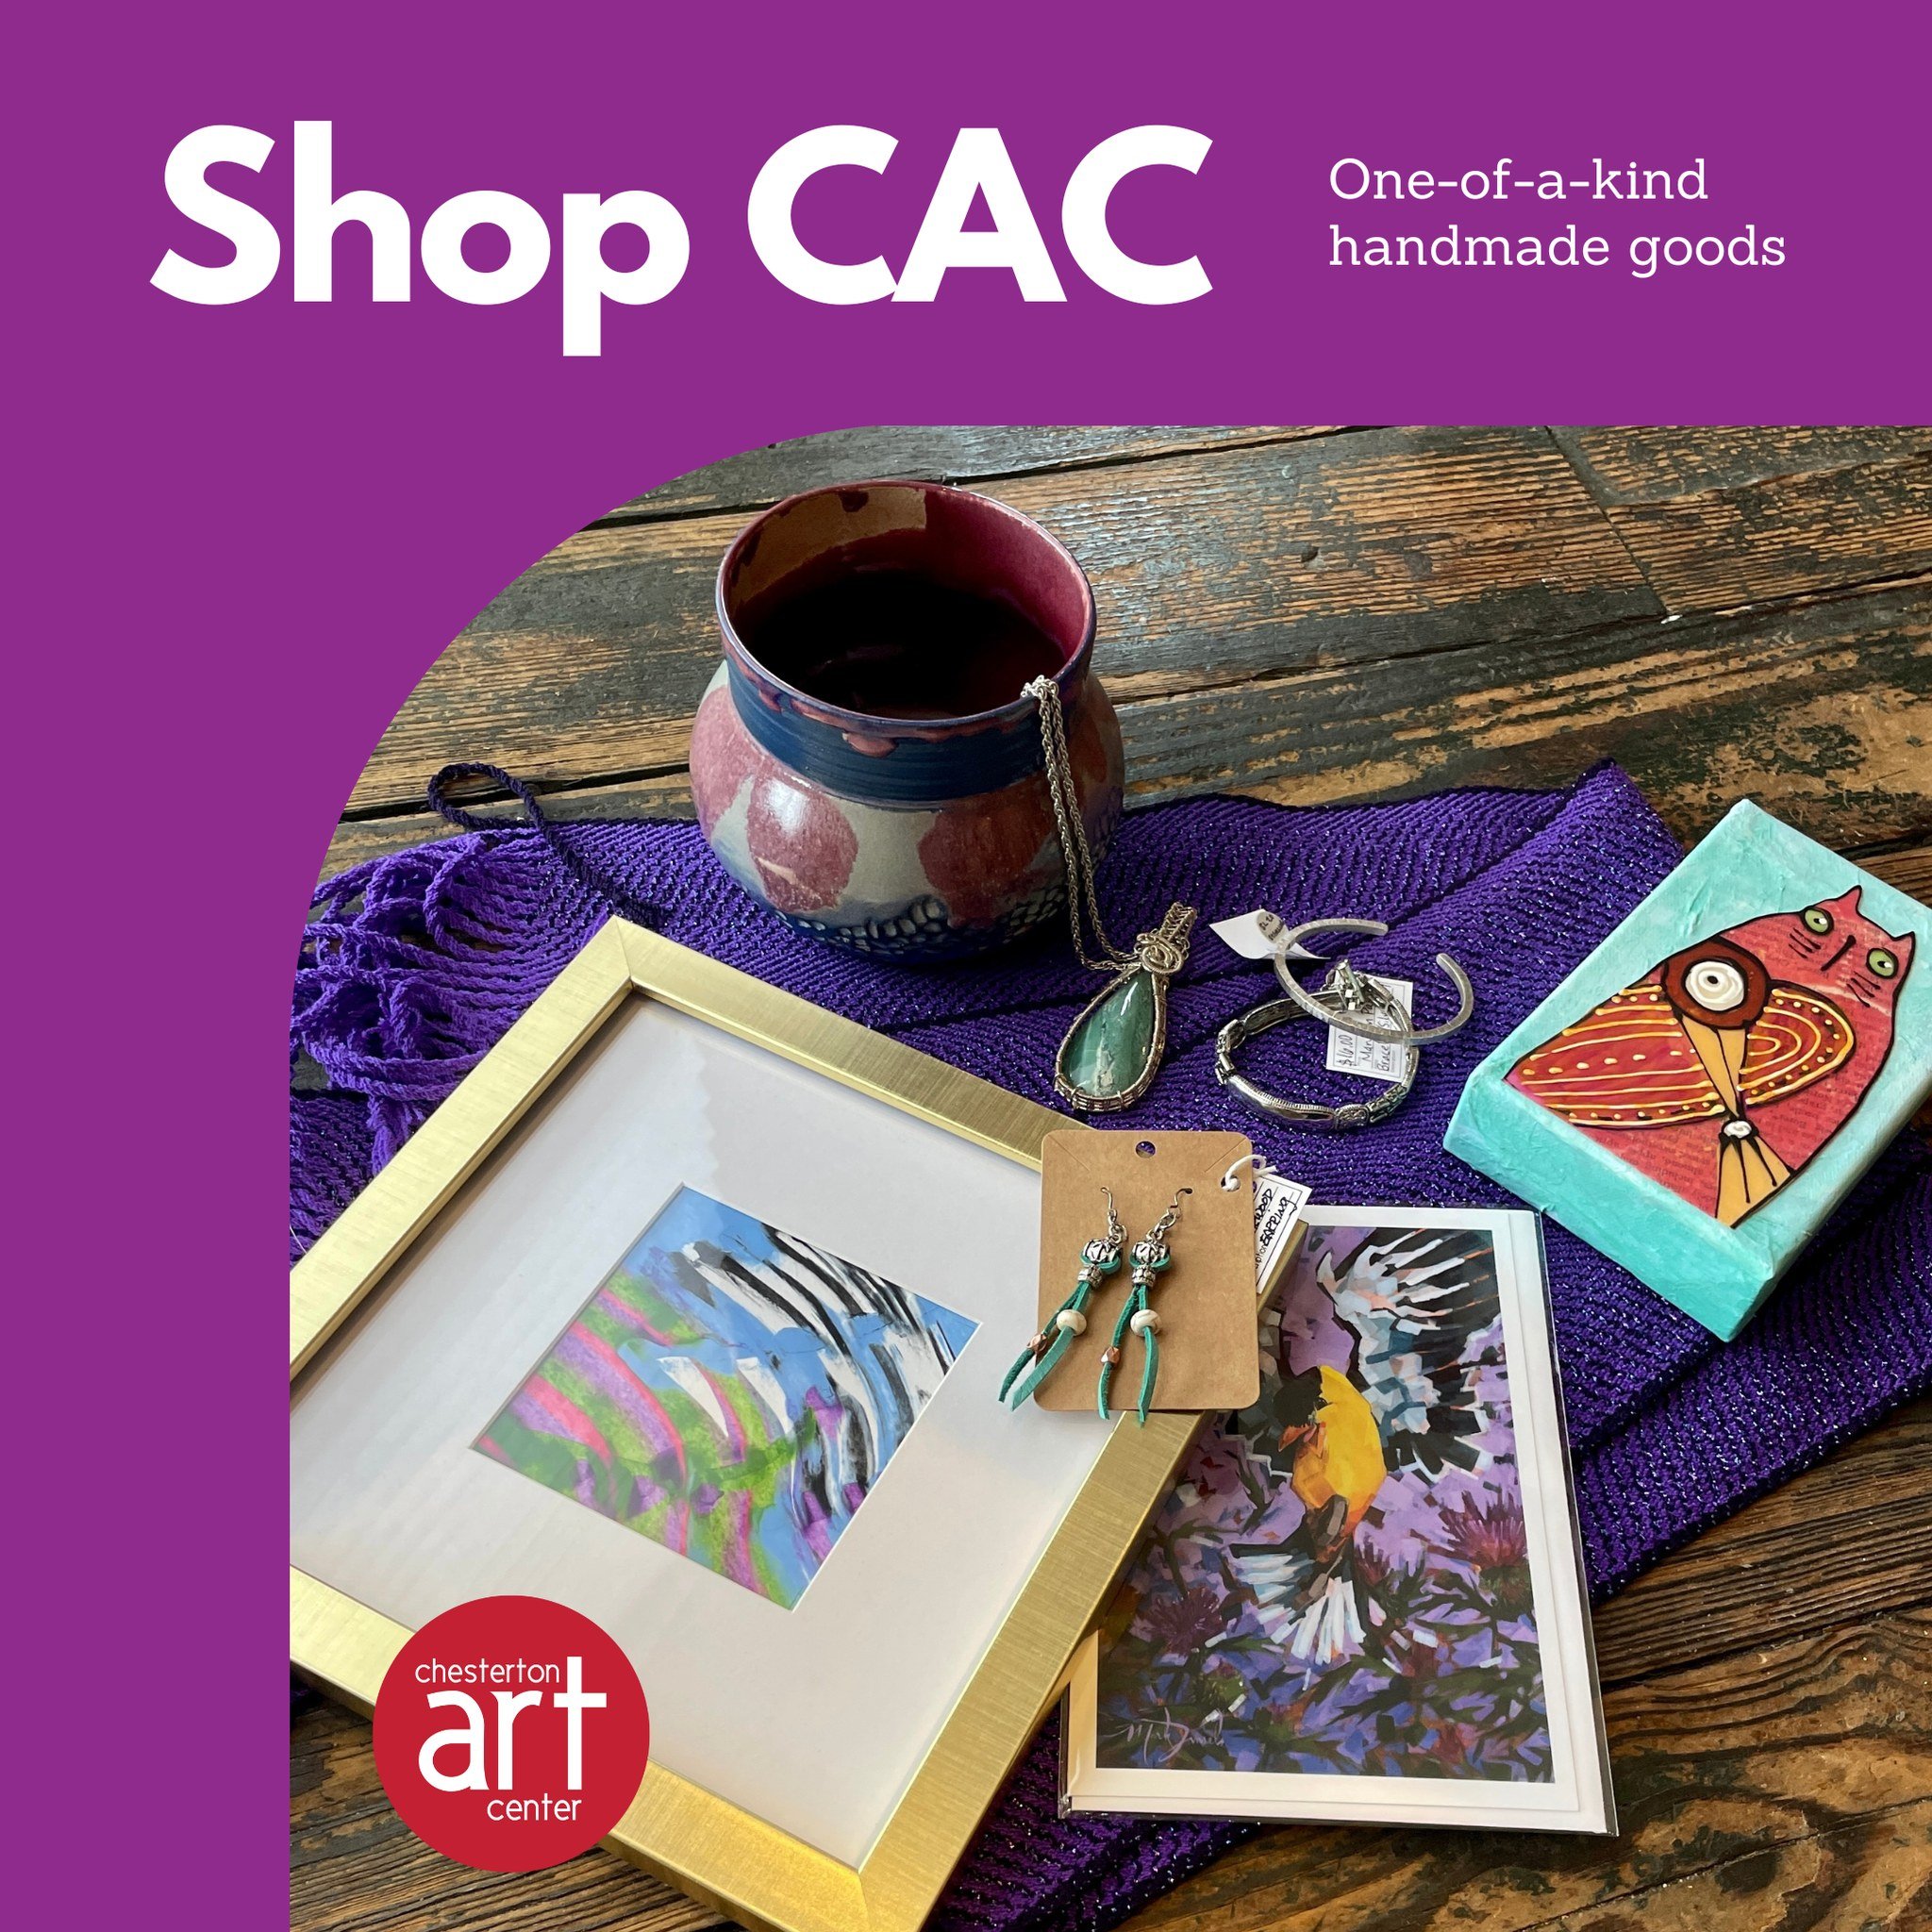 Do you know a jewelry-wearing, art-collecting, pottery-loving Mom? Stop by our Member Gallery + Gift Shop and shop all of our wonderfully unique ceramics, jewelry, original artwork and much more for this Mothers Day 💜

Our Gift Shop and Member Galle